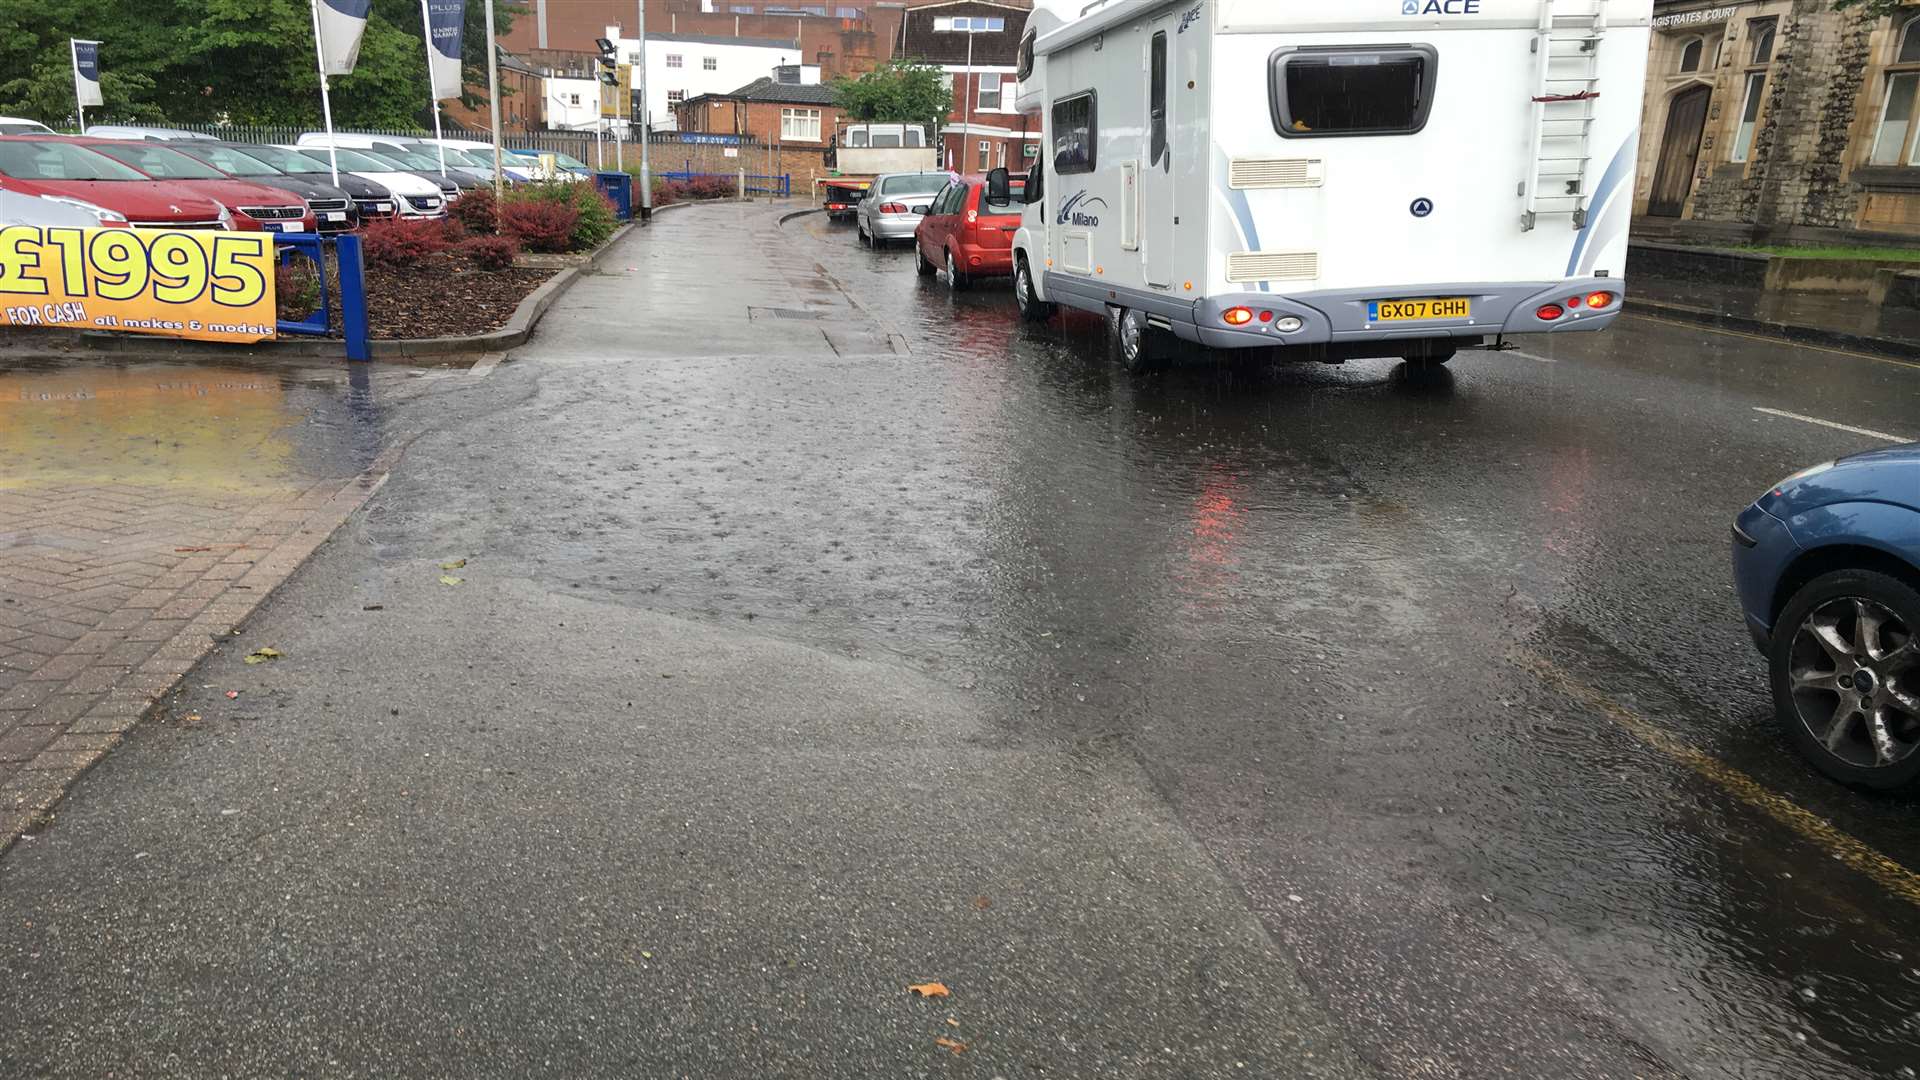 Palace Avenue in Maidstone has seen some surface flooding